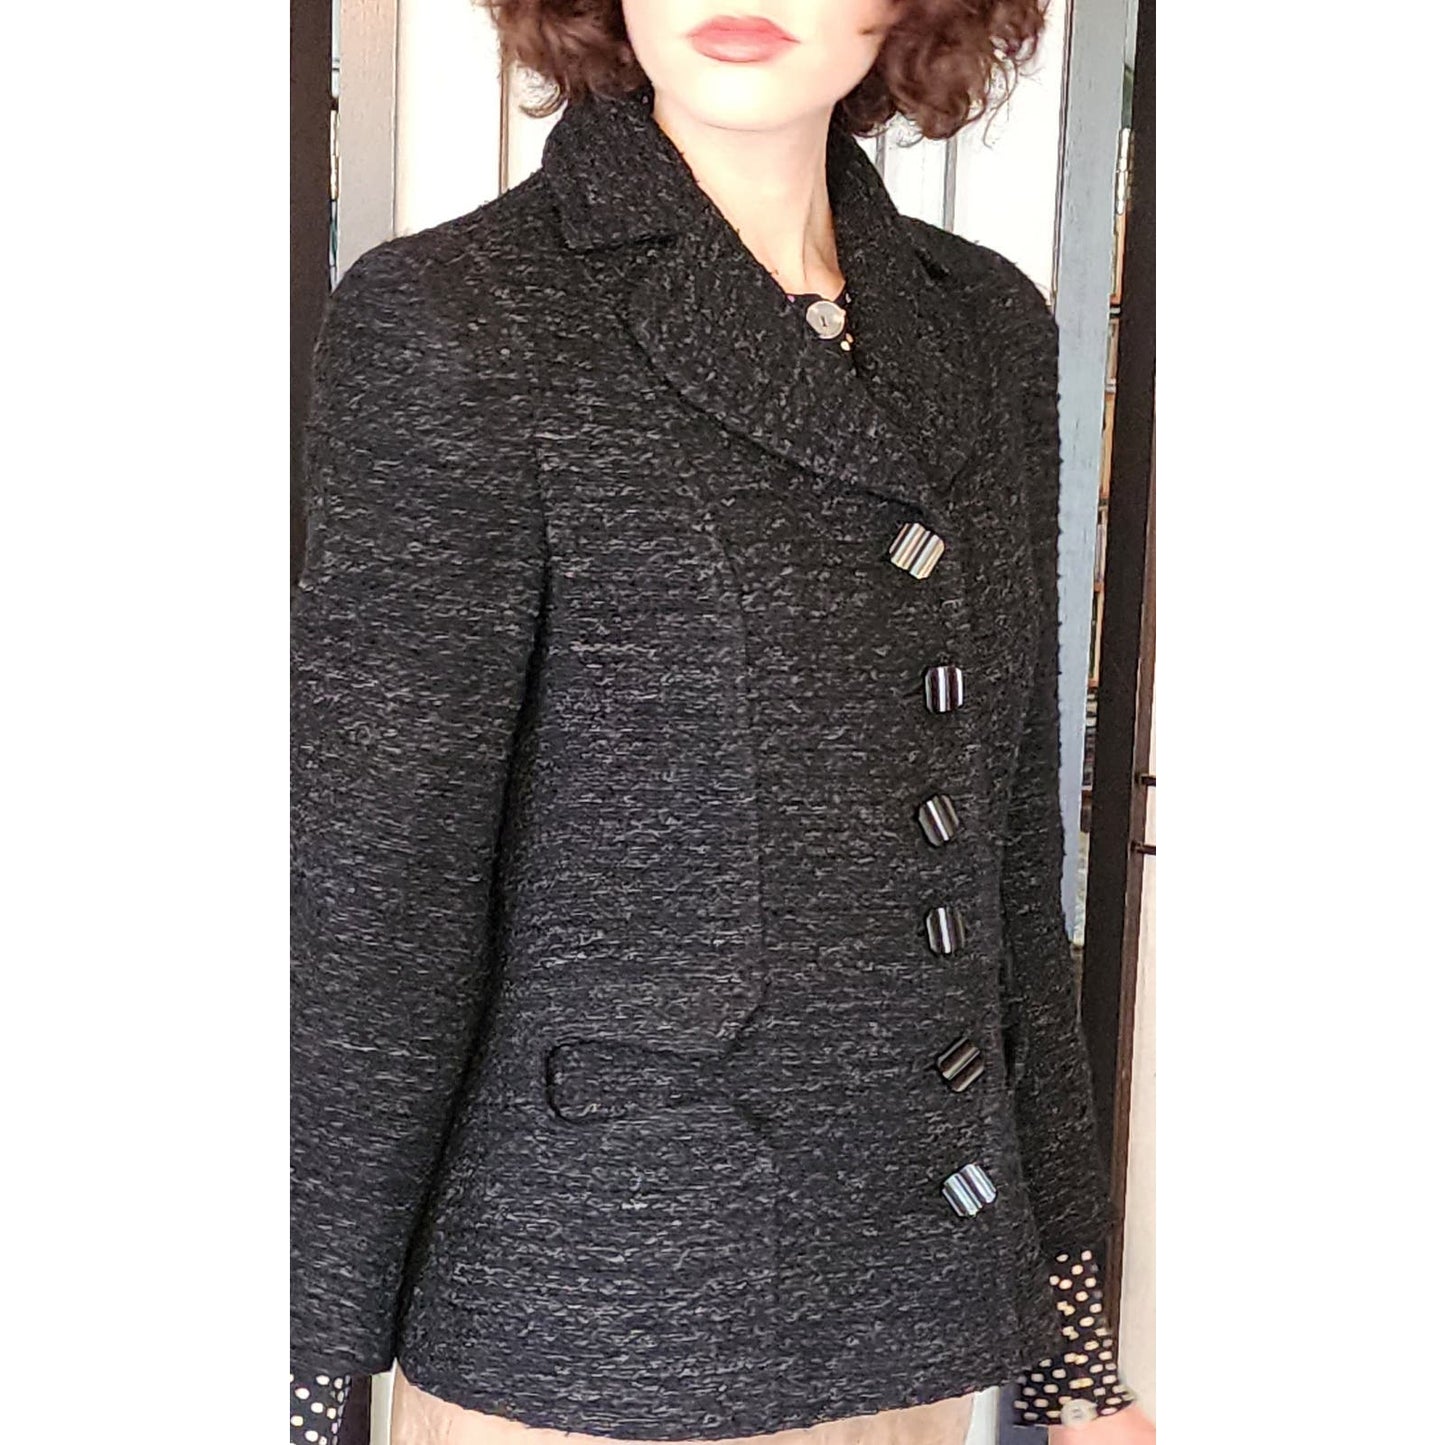 Vintage 40s Black Blazer in Nubby Wool Shiny Buttons / S